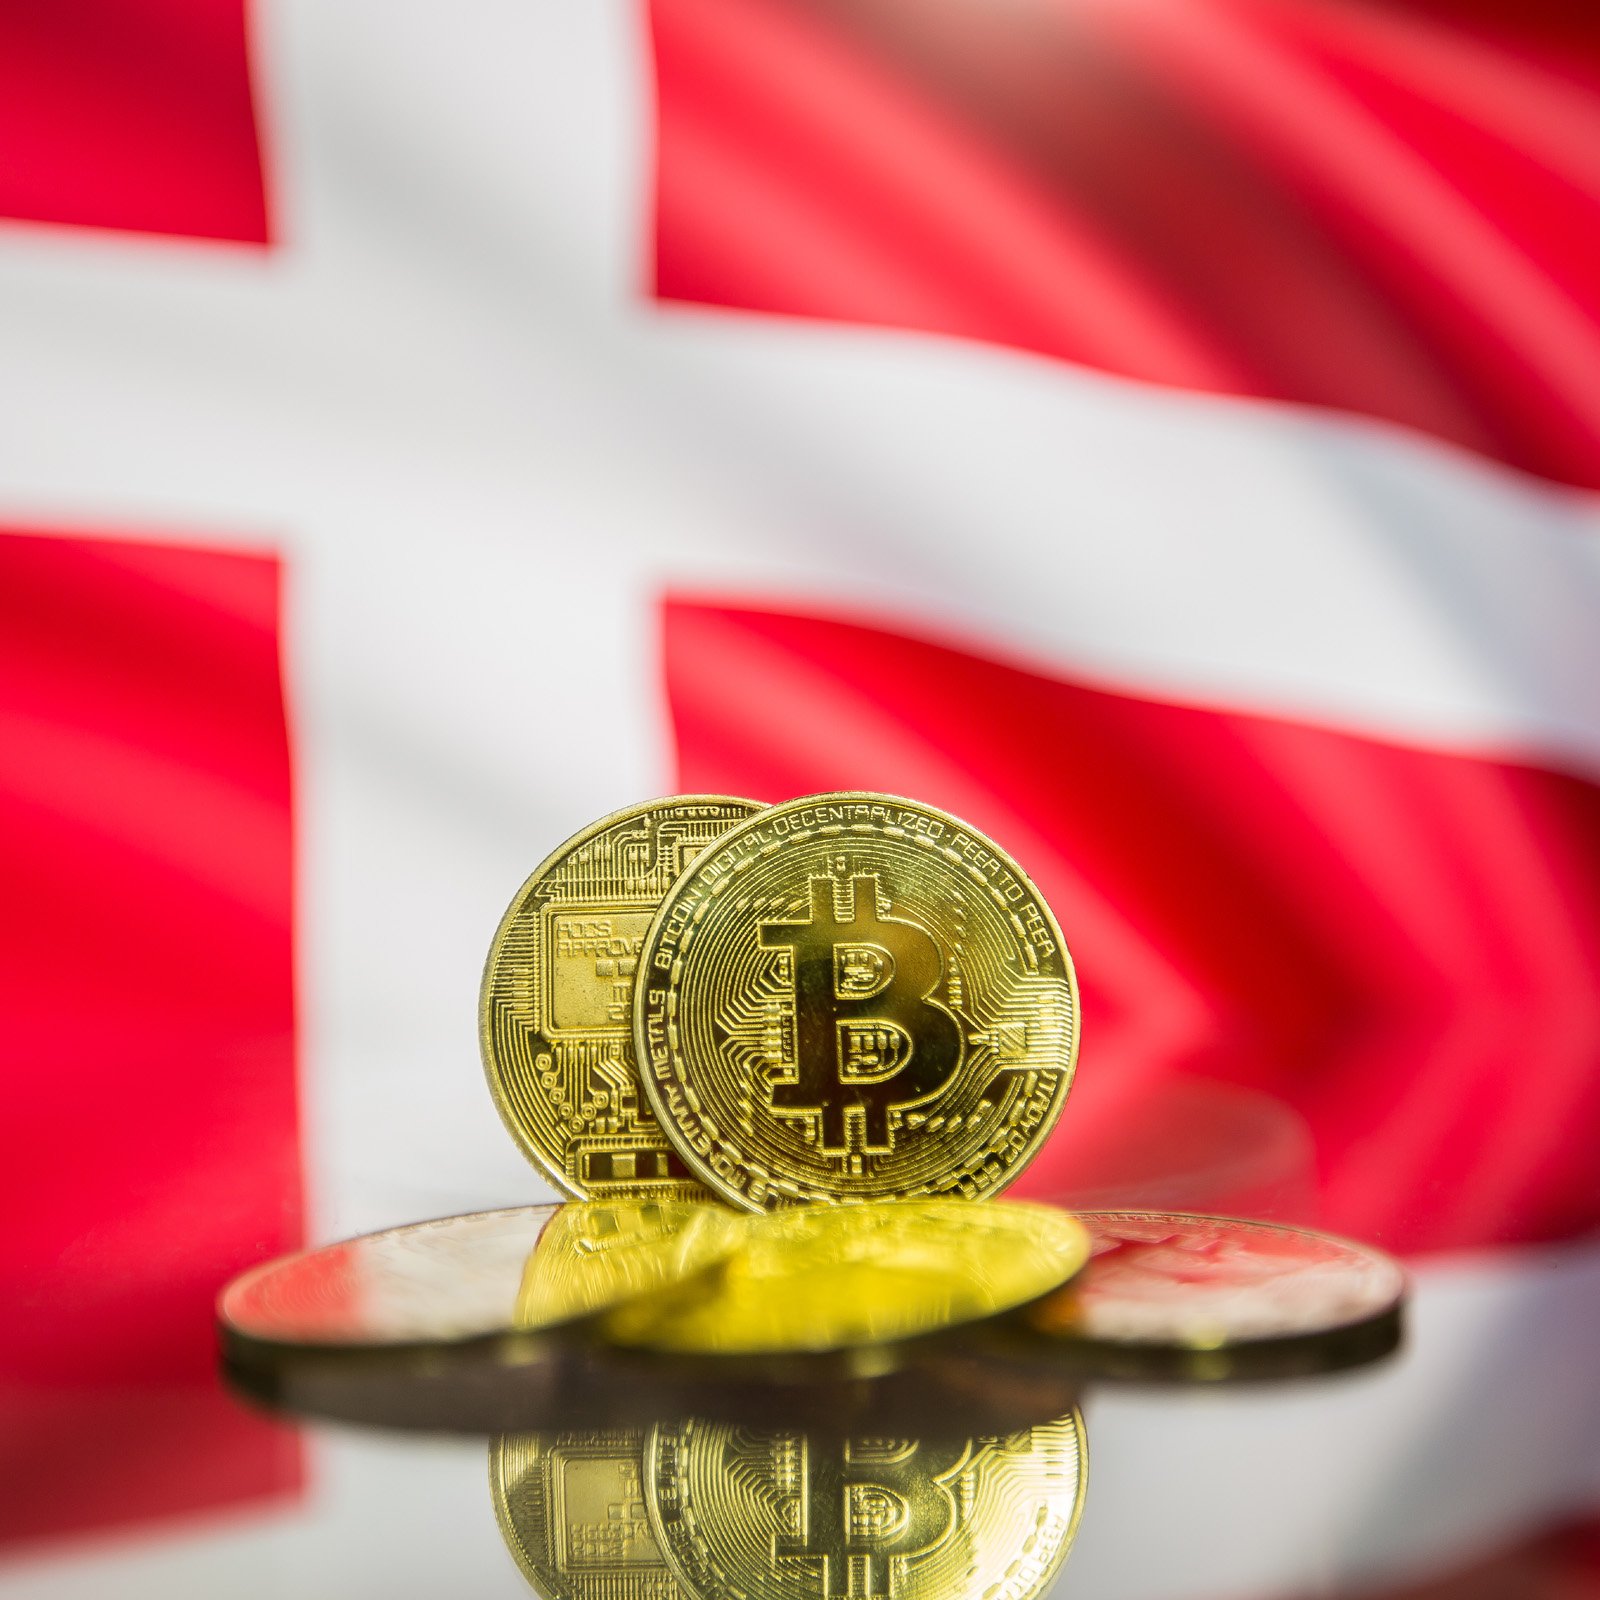 Denmark’s Tax Agency to Collect Information About Bitcoin Traders